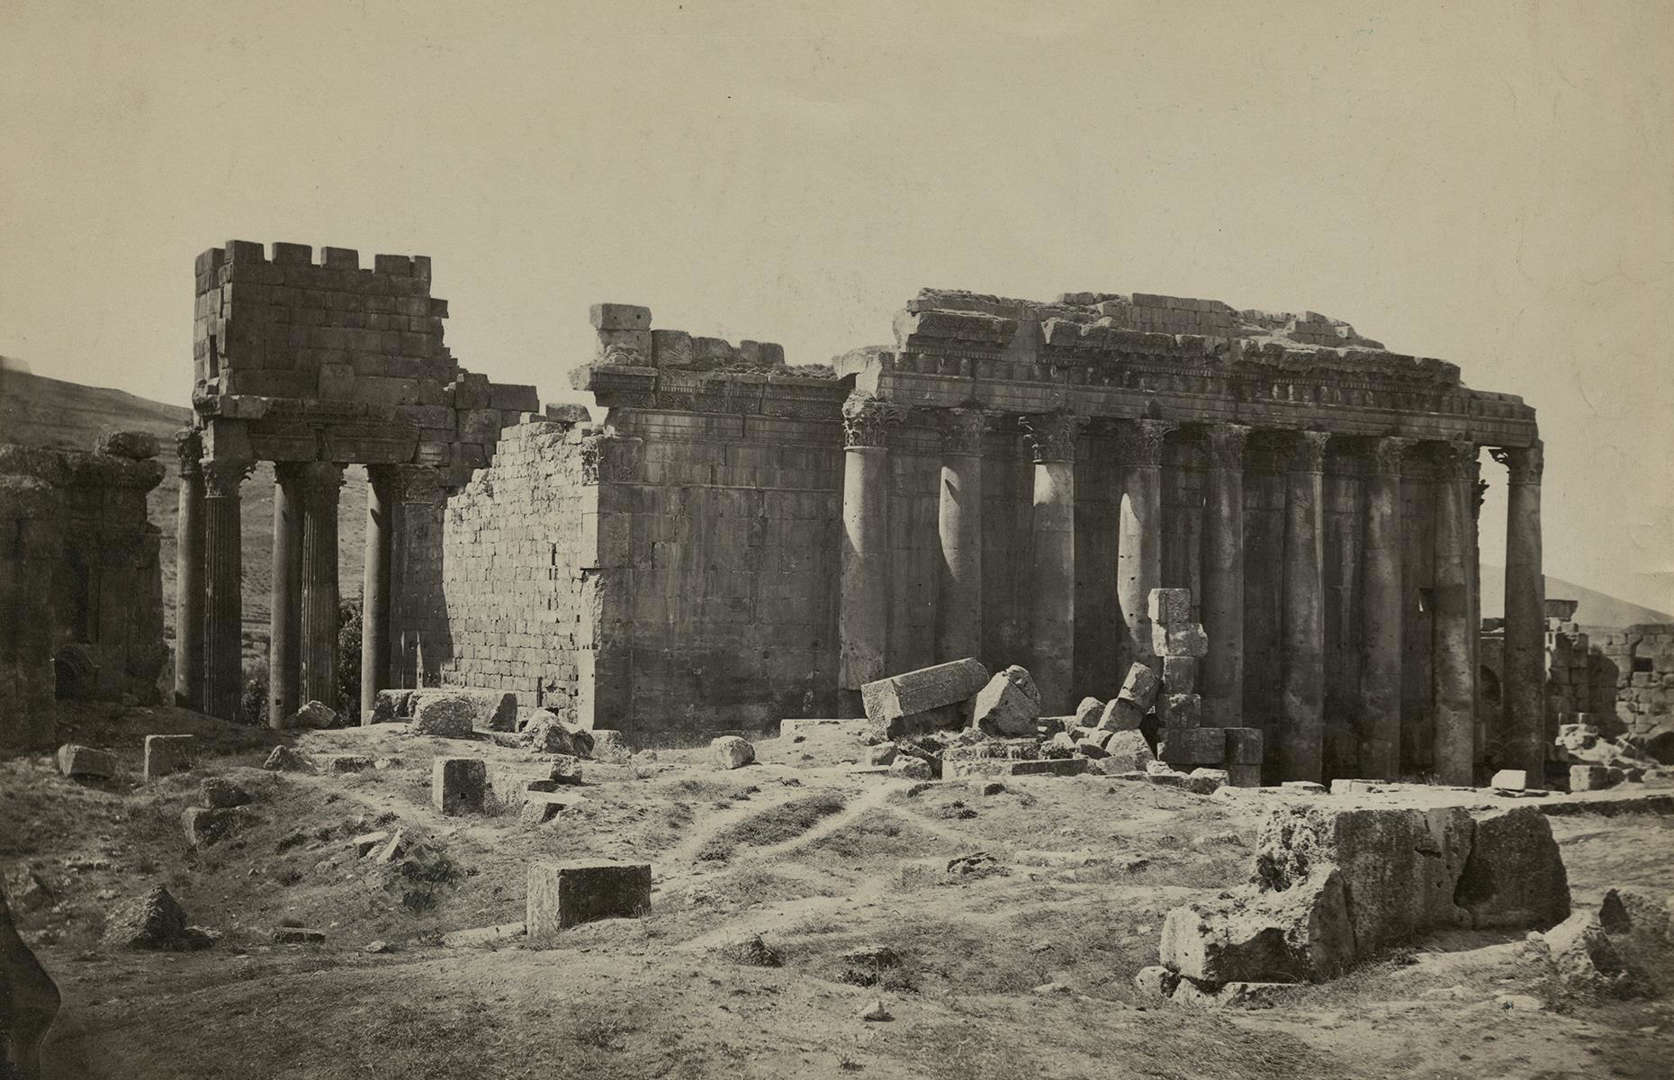 Slide 20 of 41: From one breathtaking remnant of the Roman Empire to another: the Temple of Bacchus is a key site at Baalbek, a ruined Roman town in Lebanon's Beqaa Valley. The temple itself is made up of intricate Corinthian columns and was dedicated to Roman gods of agriculture and fruitfulness. It's pictured here circa 1880, surrounded by rubble, its impressive columns crumbling.